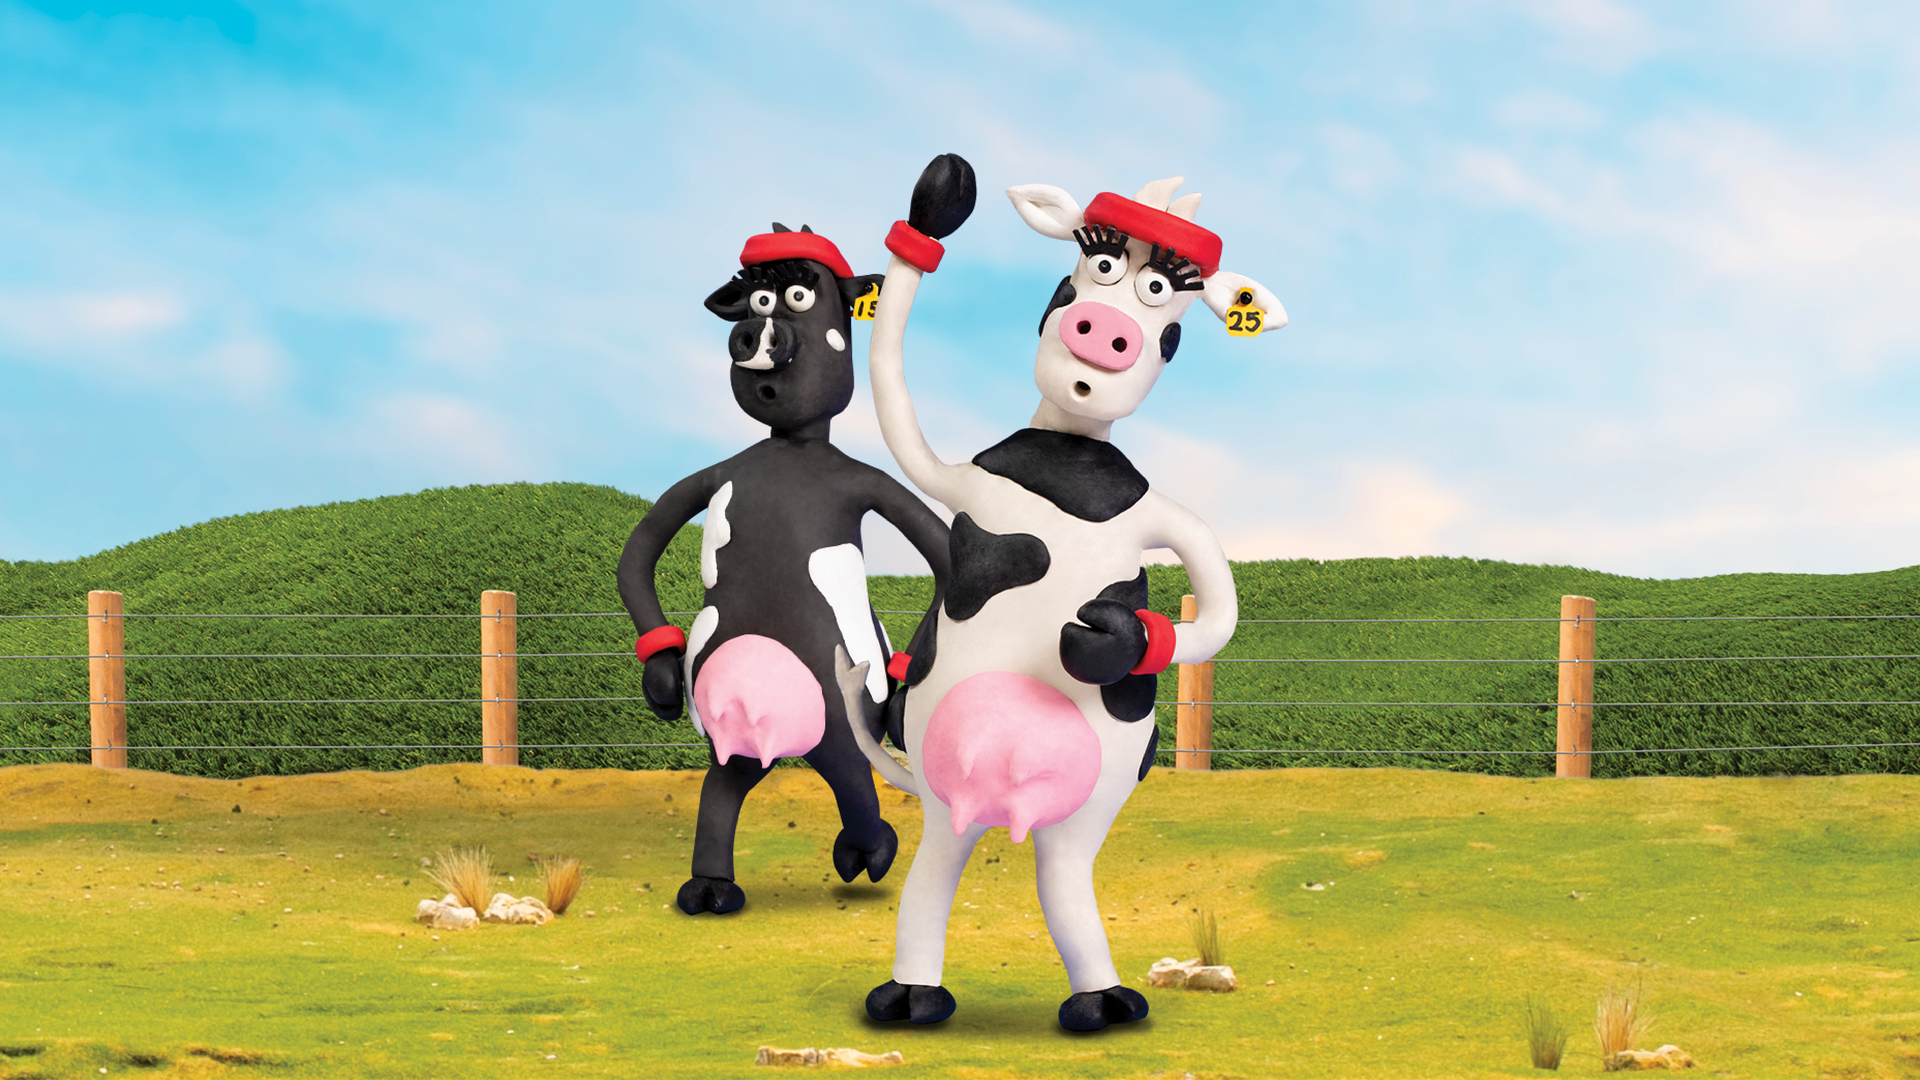 RAGT NZ cow characters on set